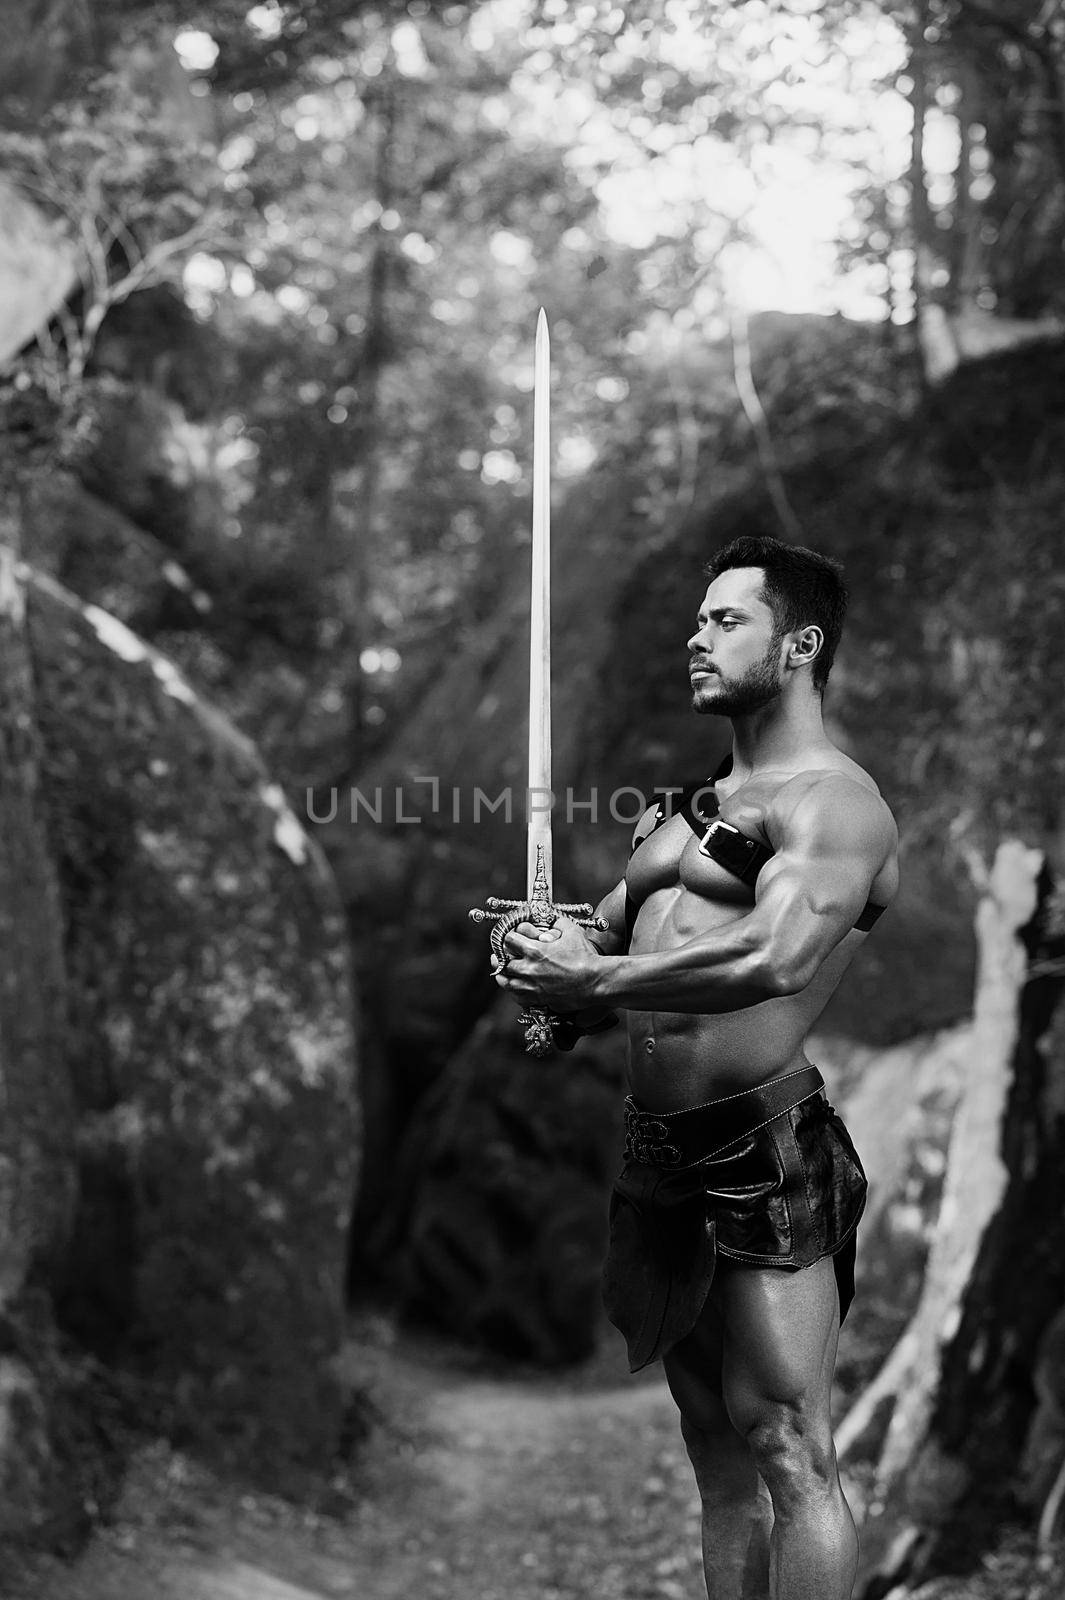 Manly warrior at the mountains by SerhiiBobyk